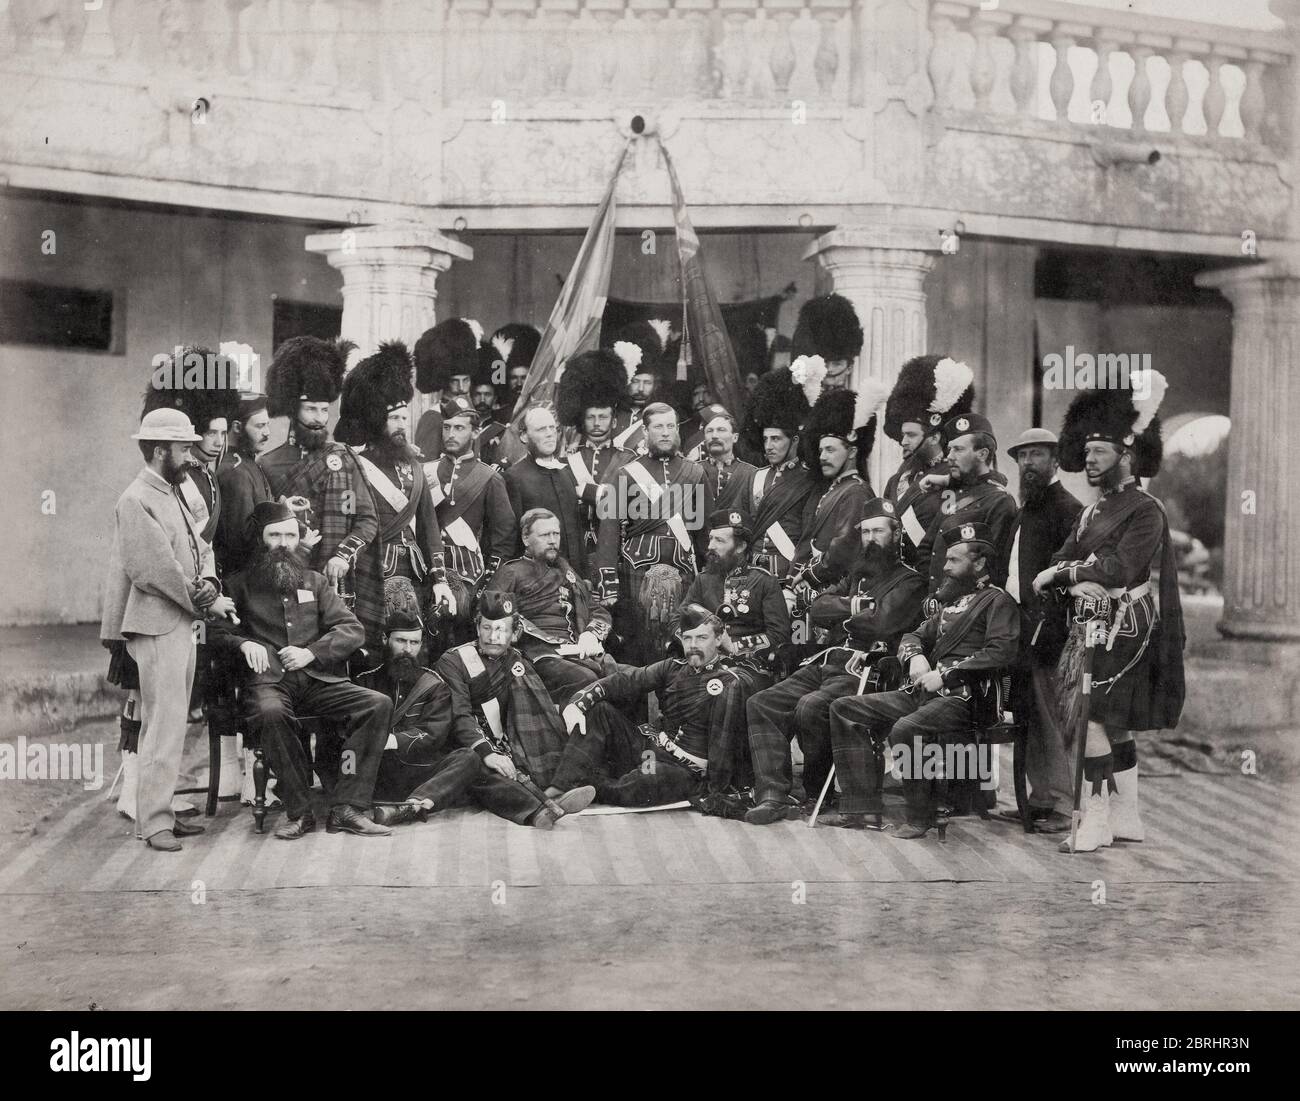 133-Z 1873 SCOTLAND Group of Officers 79th HIGHLANDERS Photo 